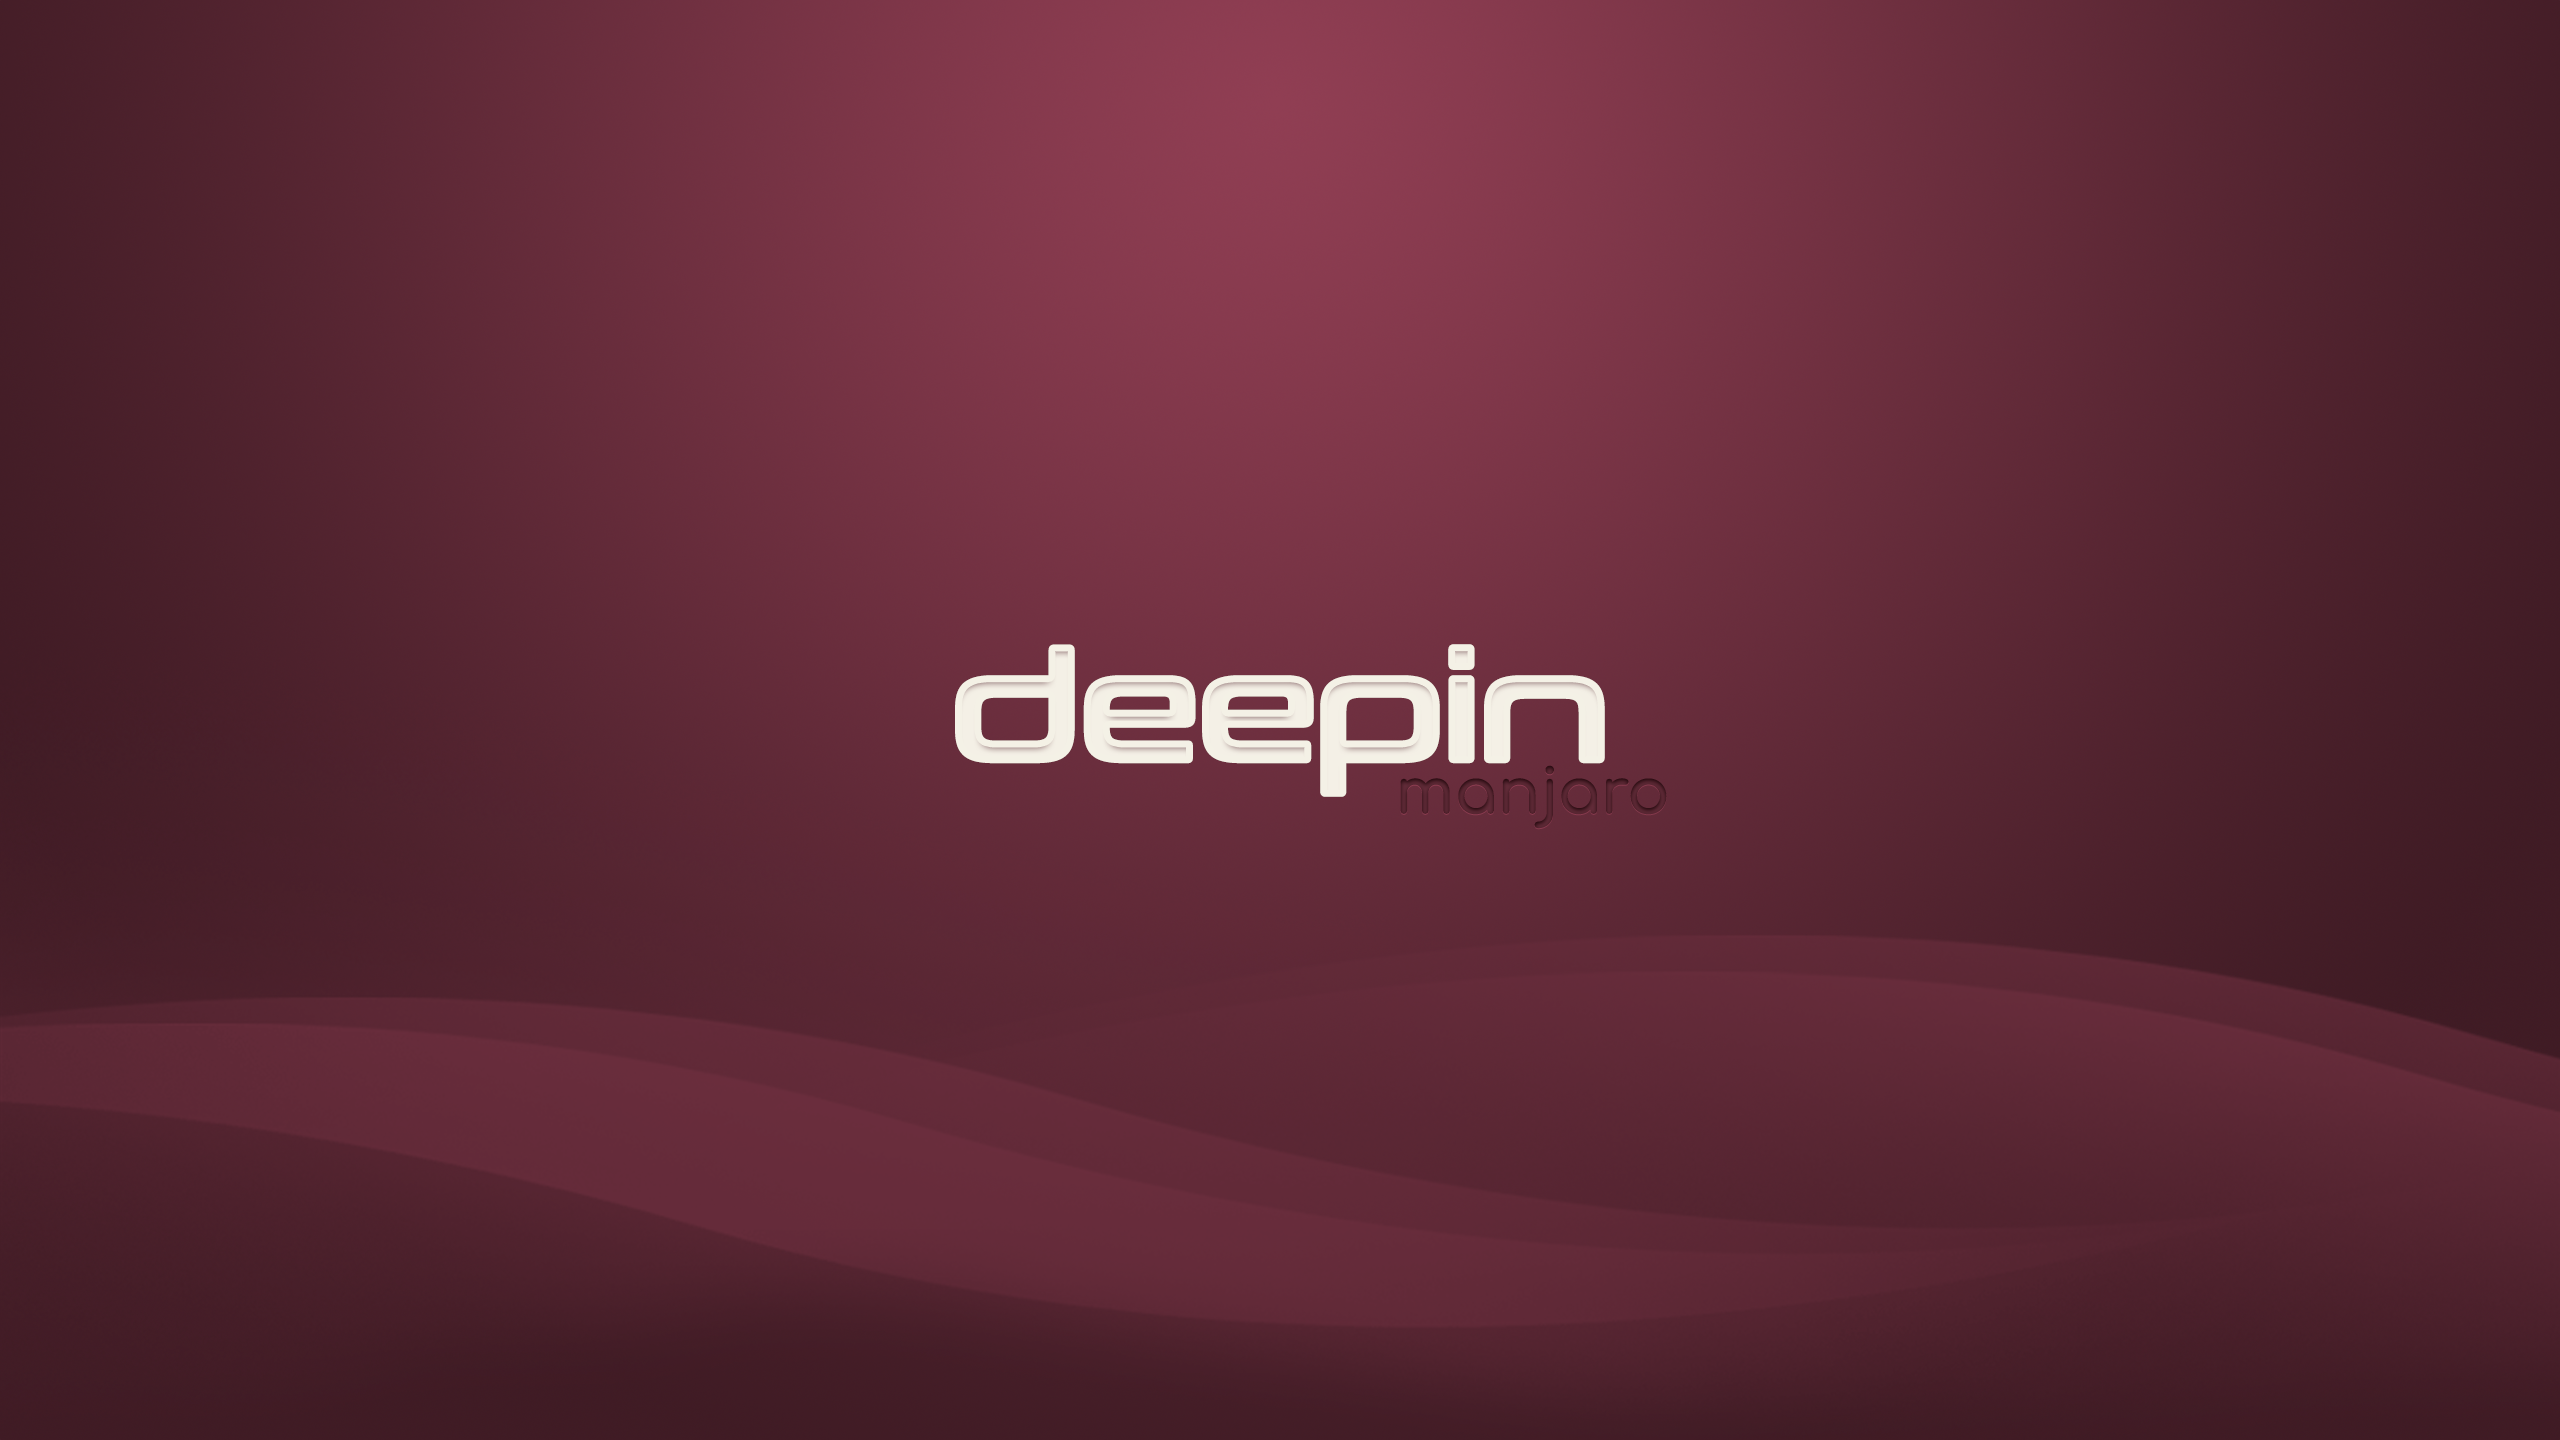 manjaro deepin Soft Pink by ant-ony_679516246.png